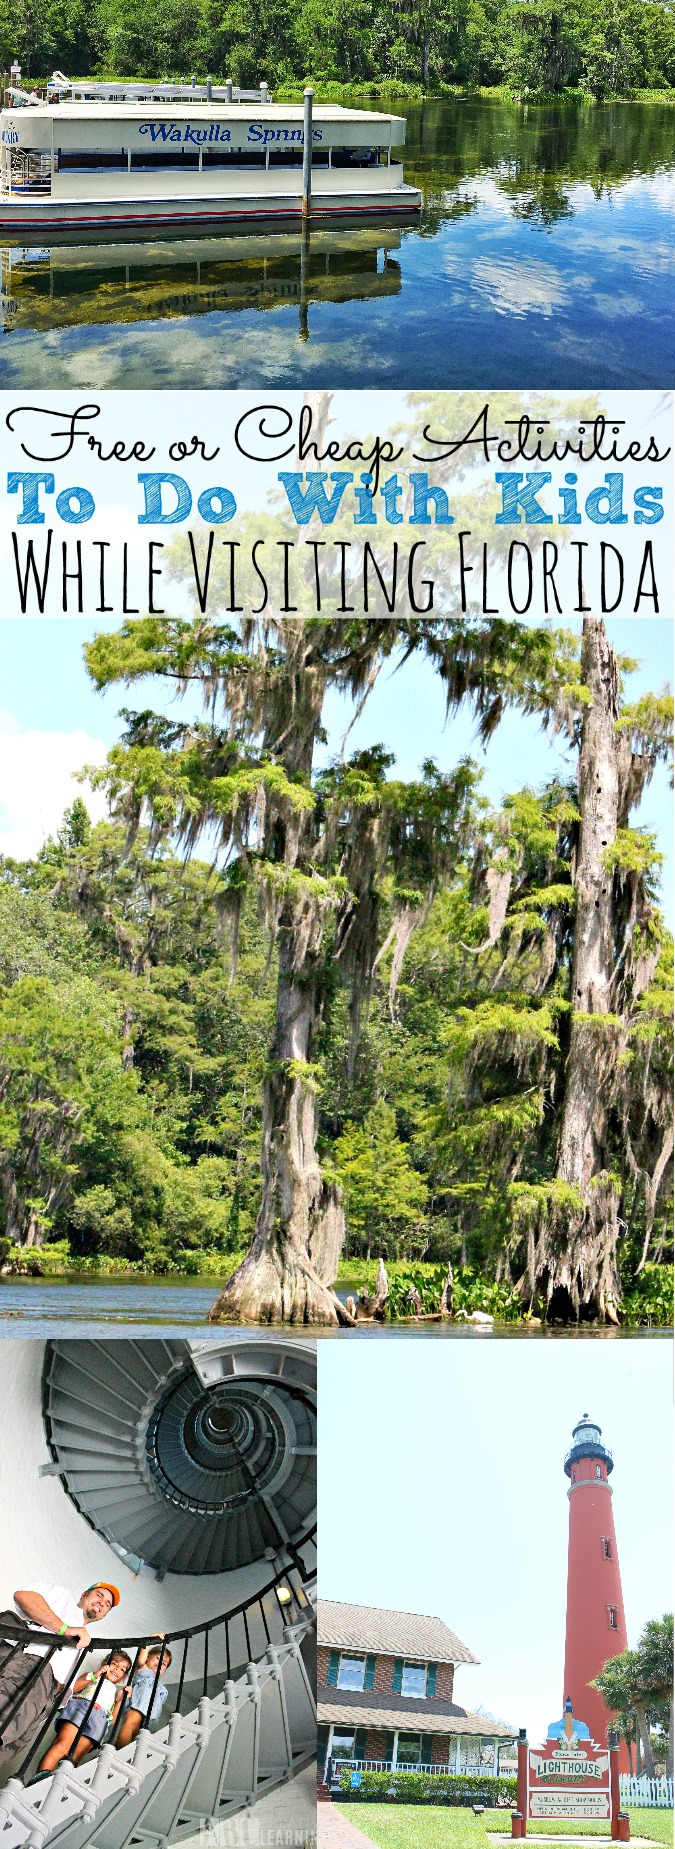 Free or Cheap Activities To Do With Kids In Florida